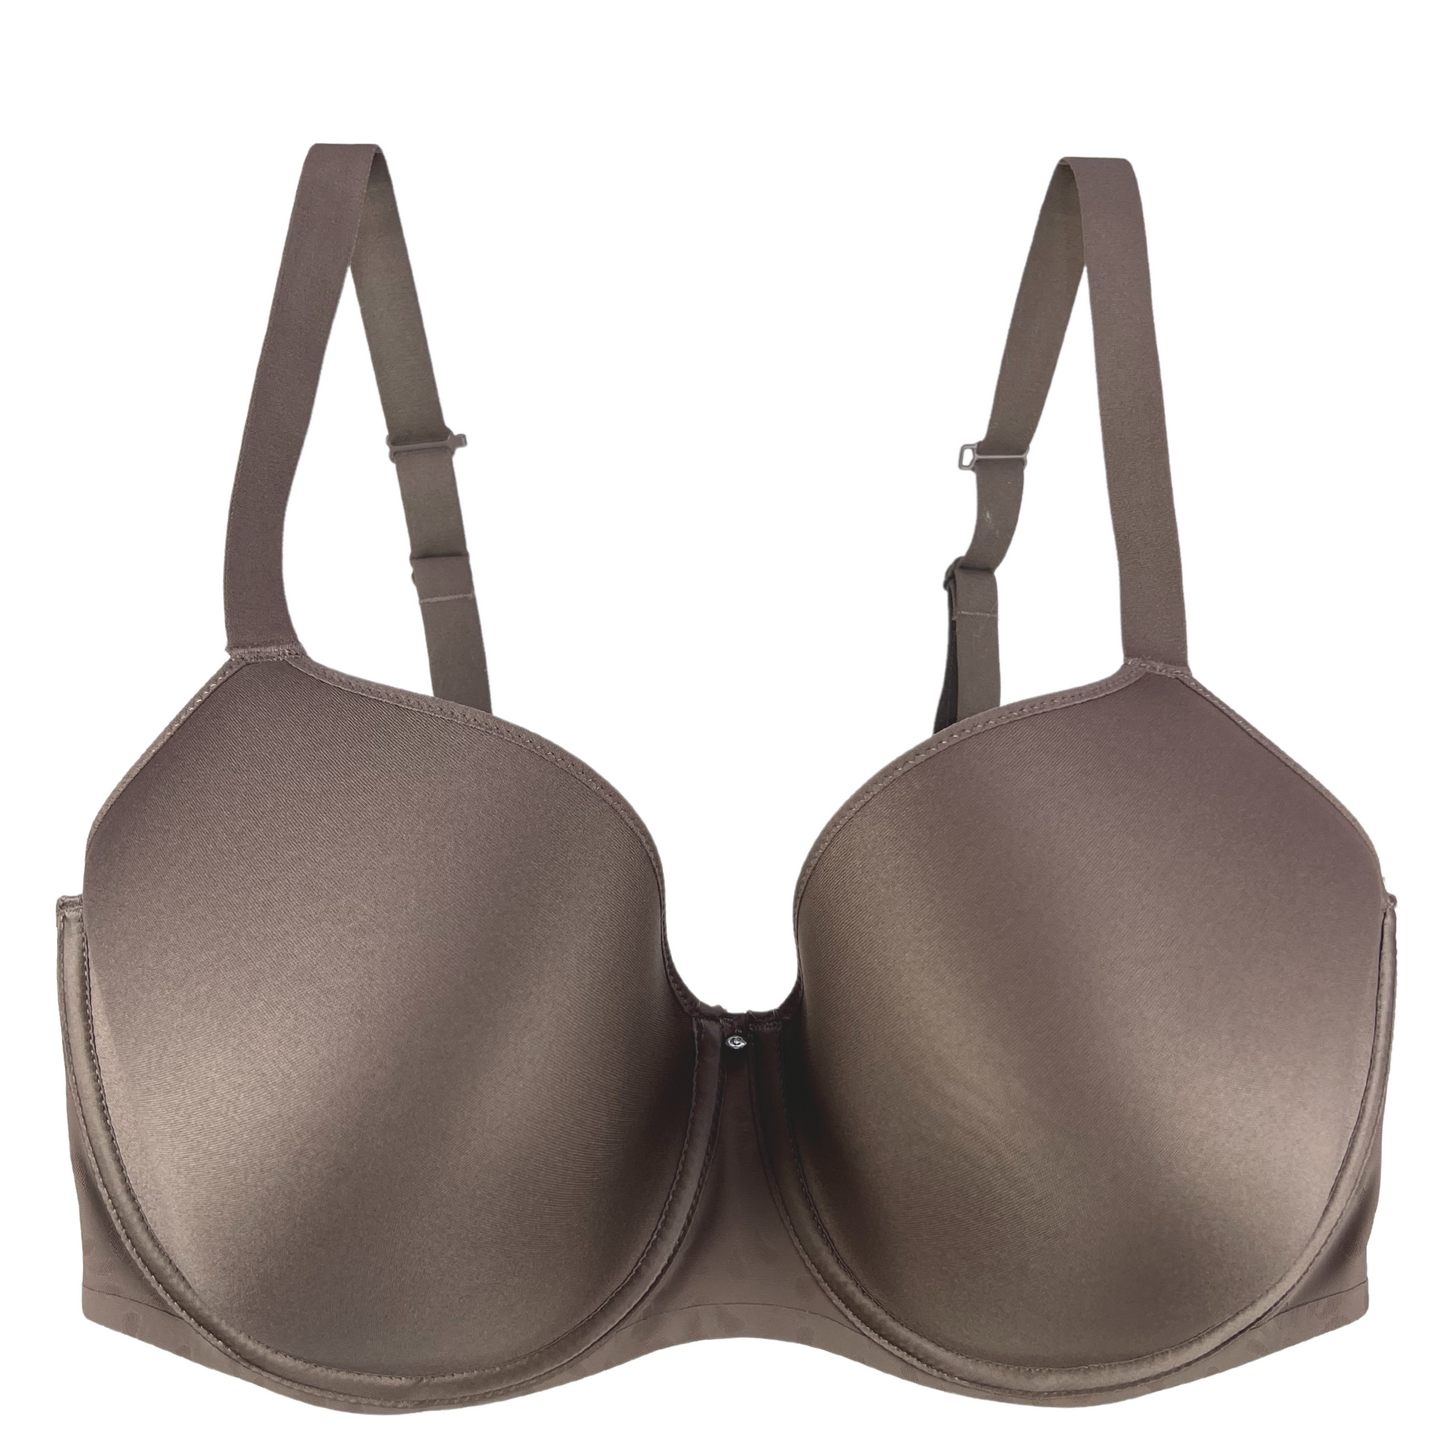 Chantelle Essentiall Bra Covering T-Shirt Bras Moulded Underwired